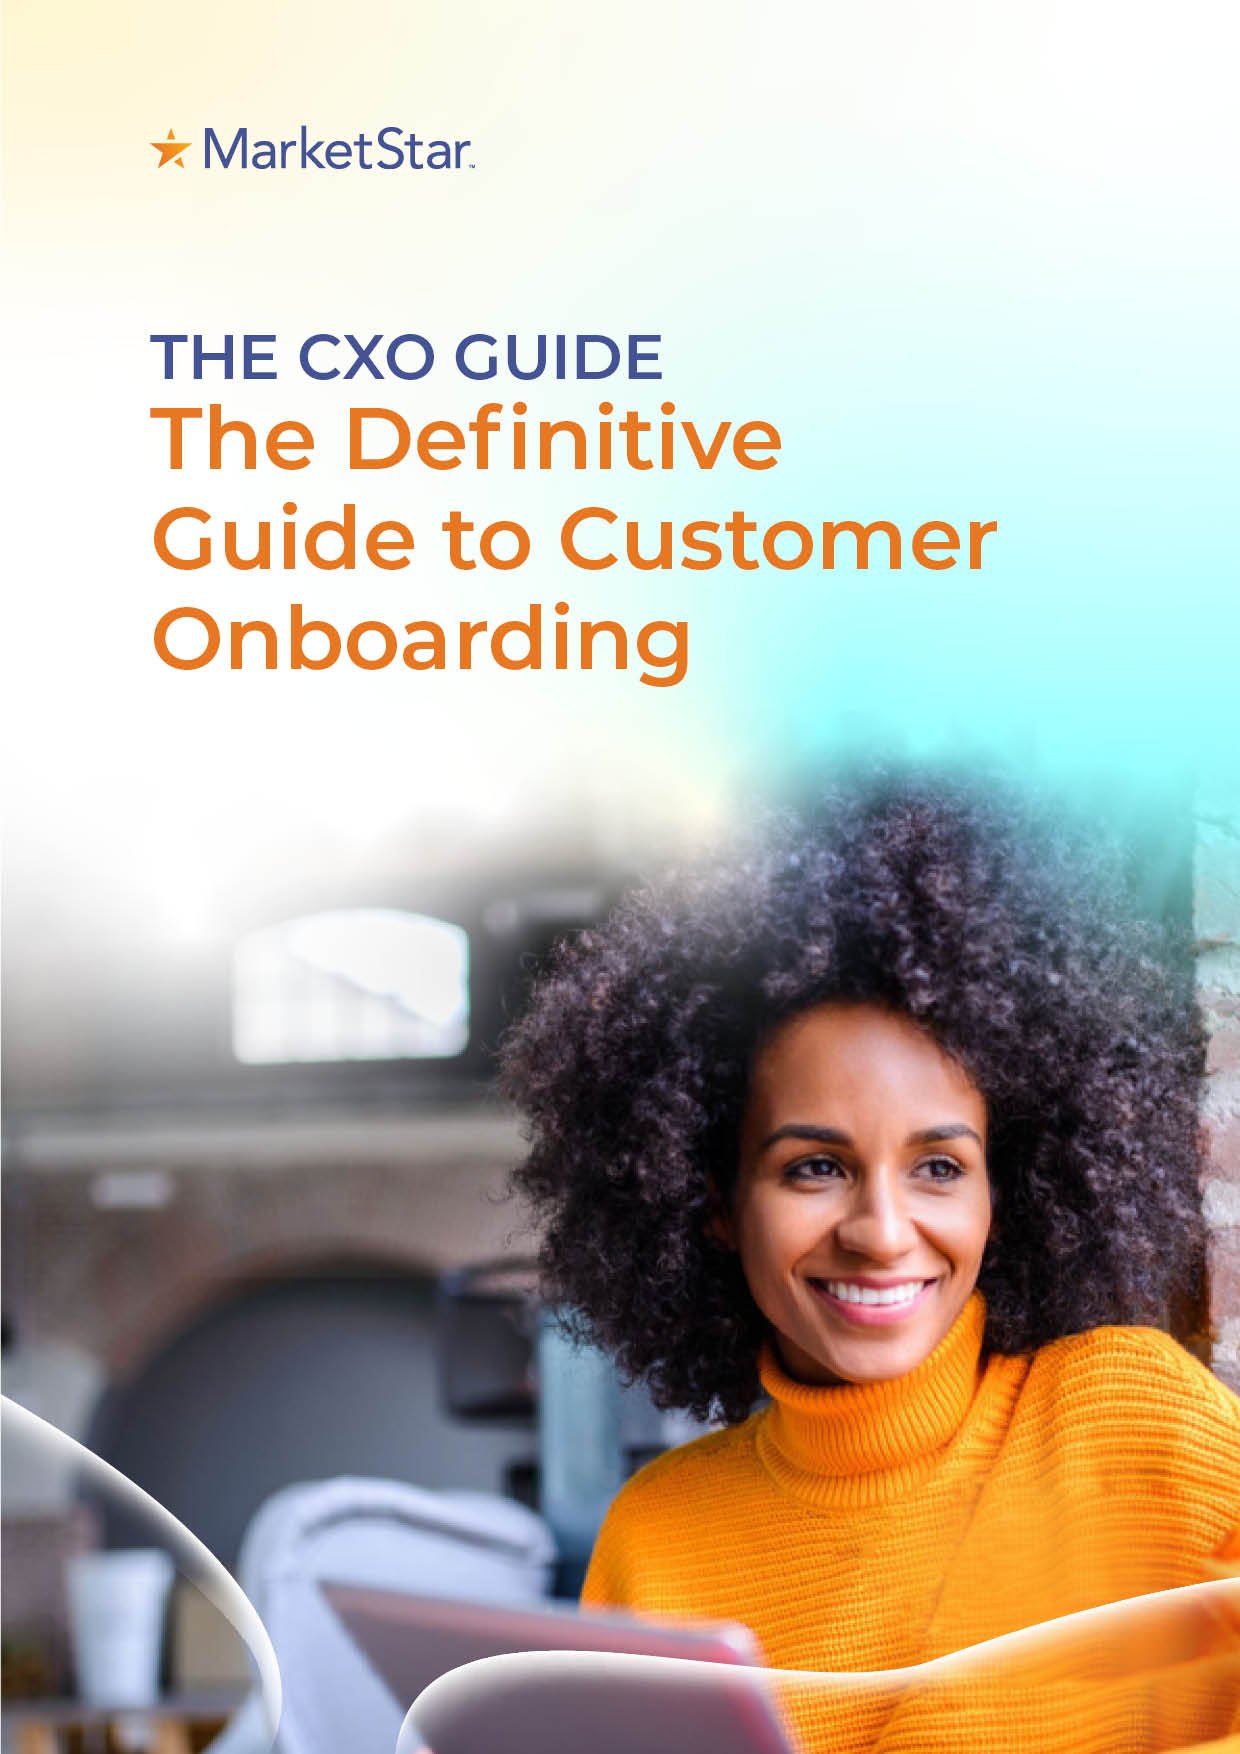 The CXO Guide to Customer Onboarding